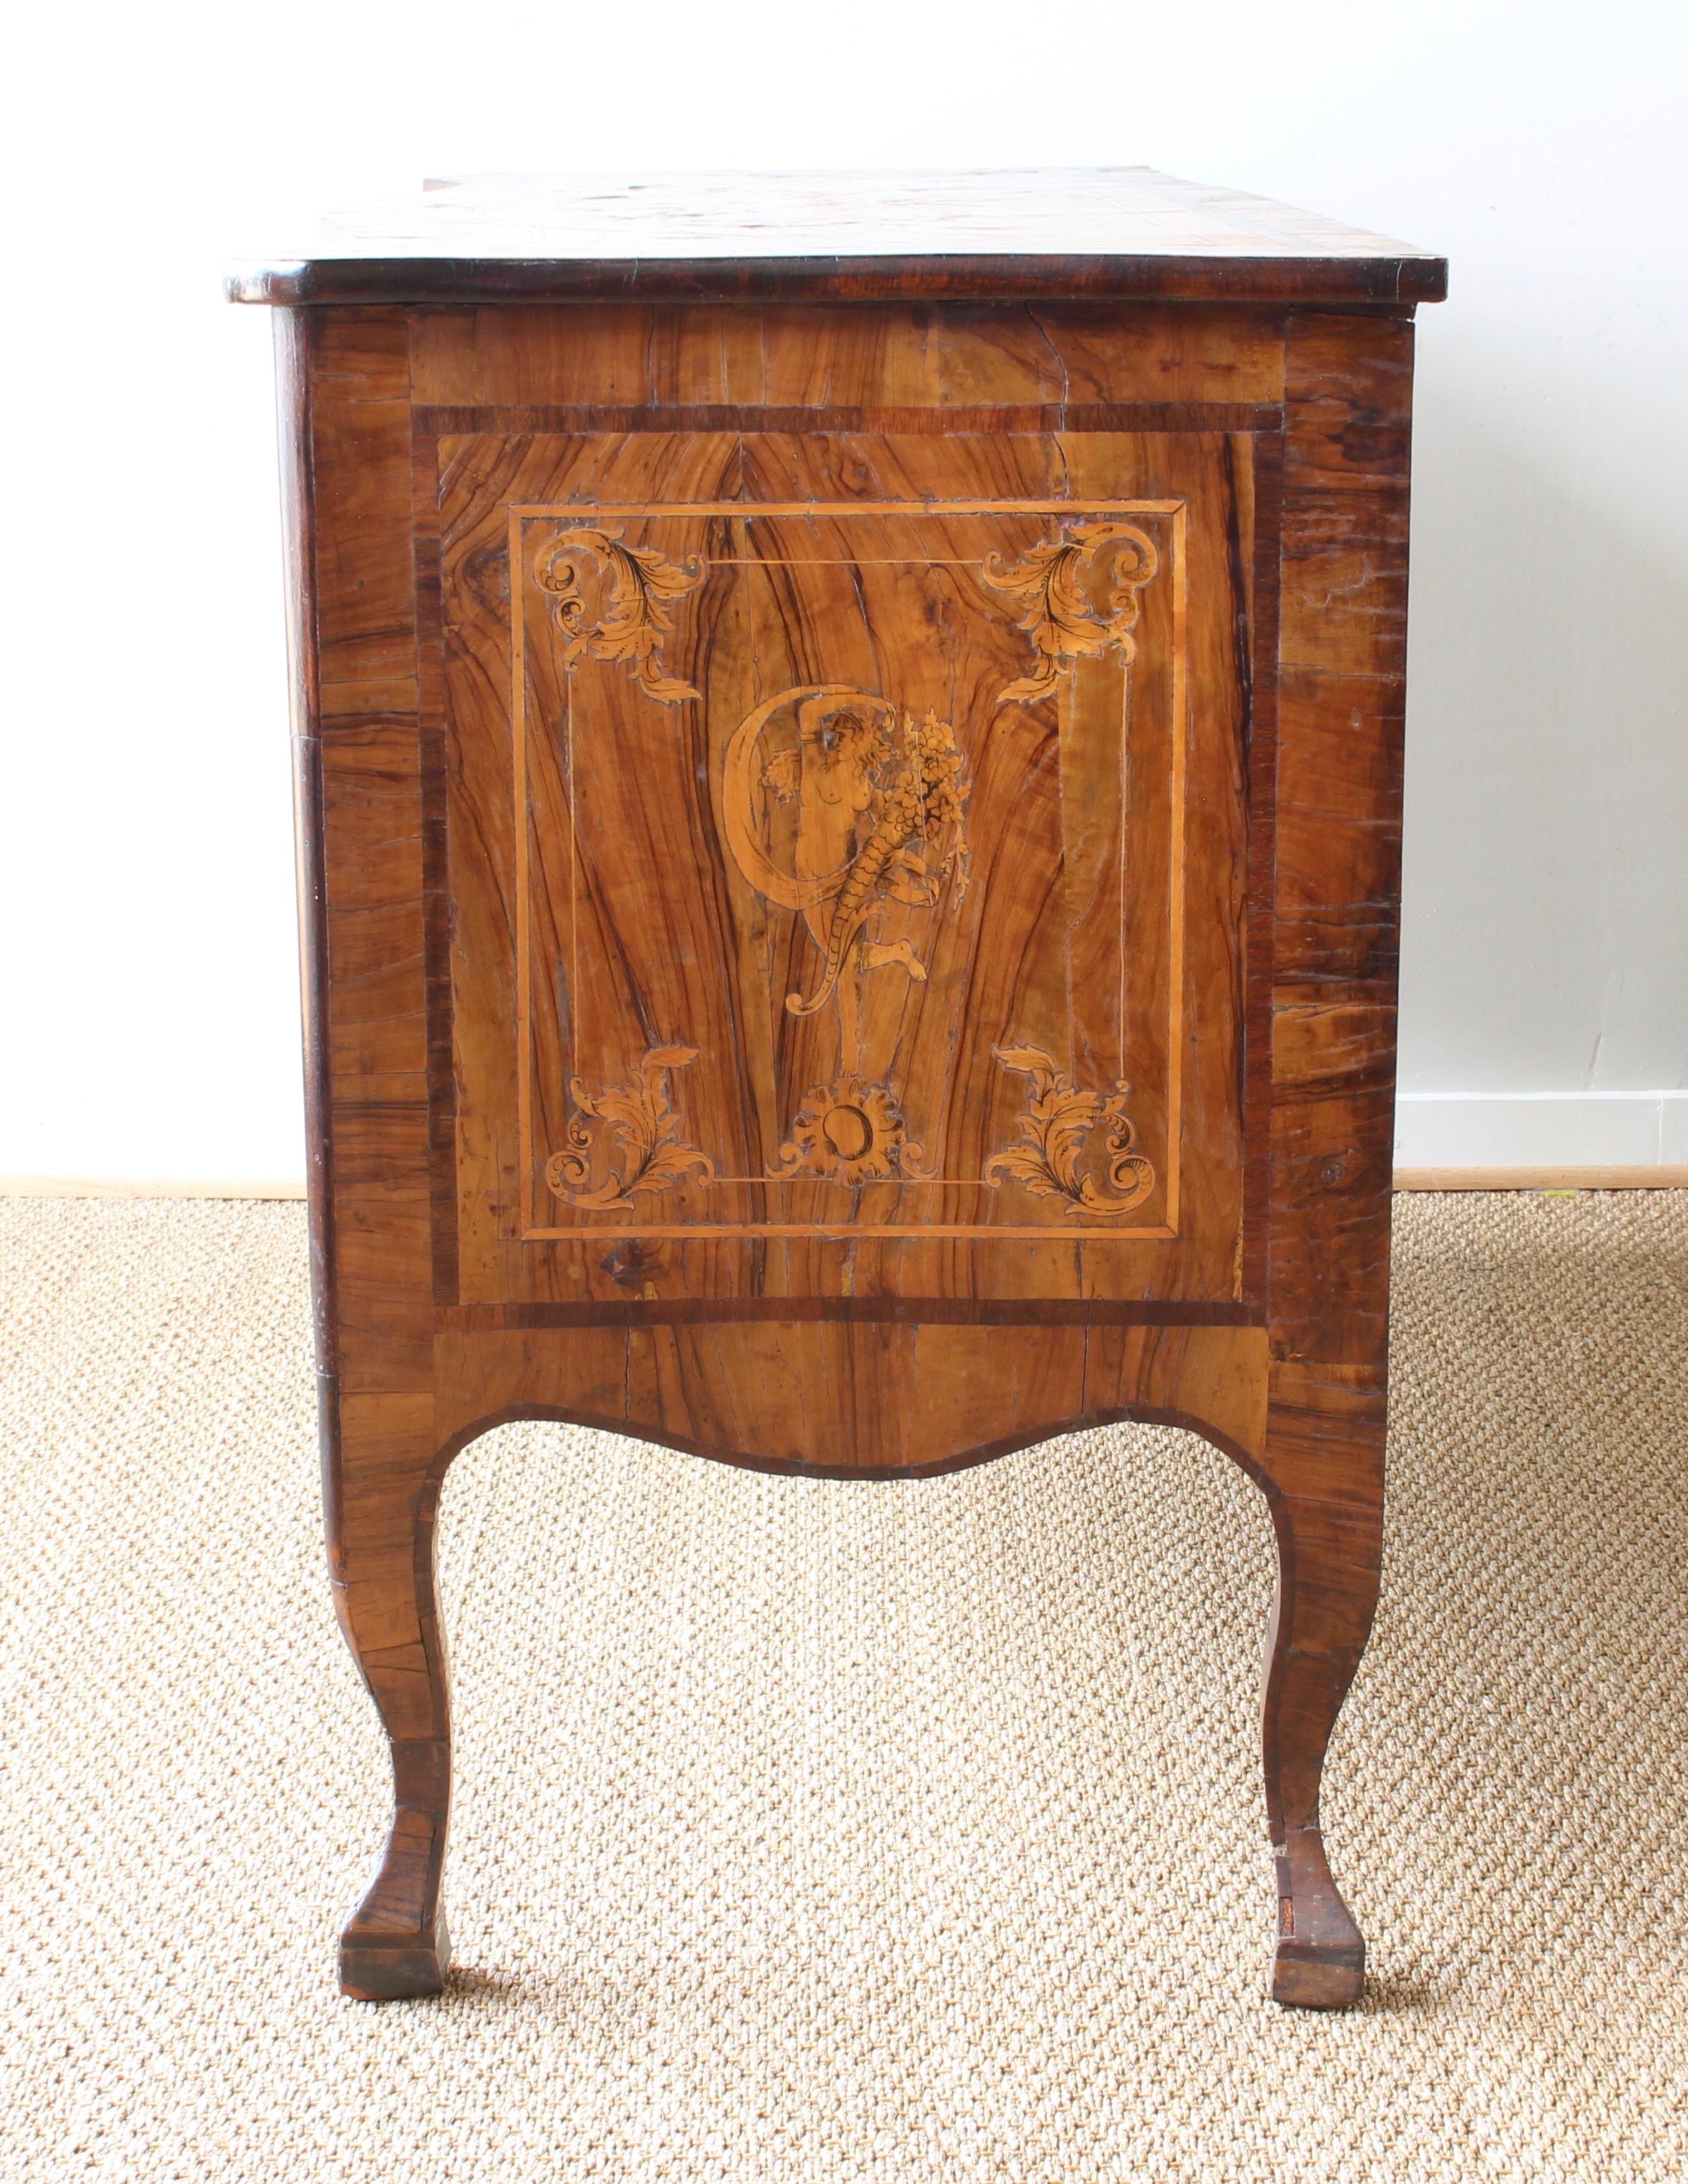 18th Century Dutch Serpentine Front Marquetry Commode In Good Condition For Sale In Kilmarnock, VA